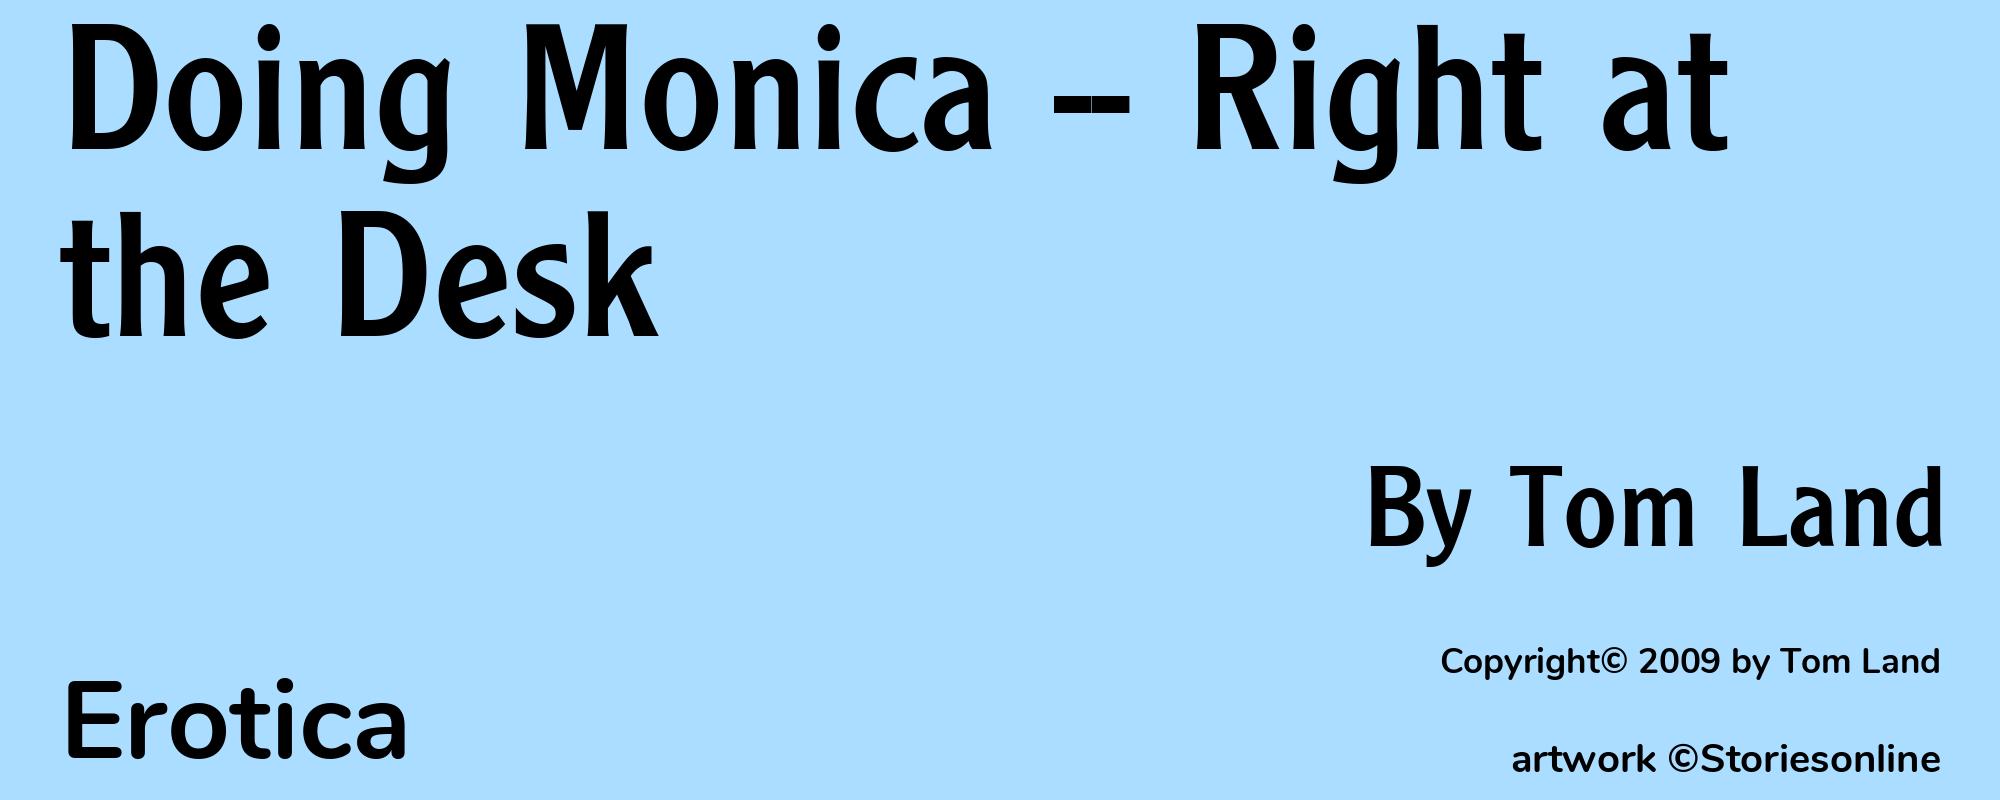 Doing Monica -- Right at the Desk - Cover